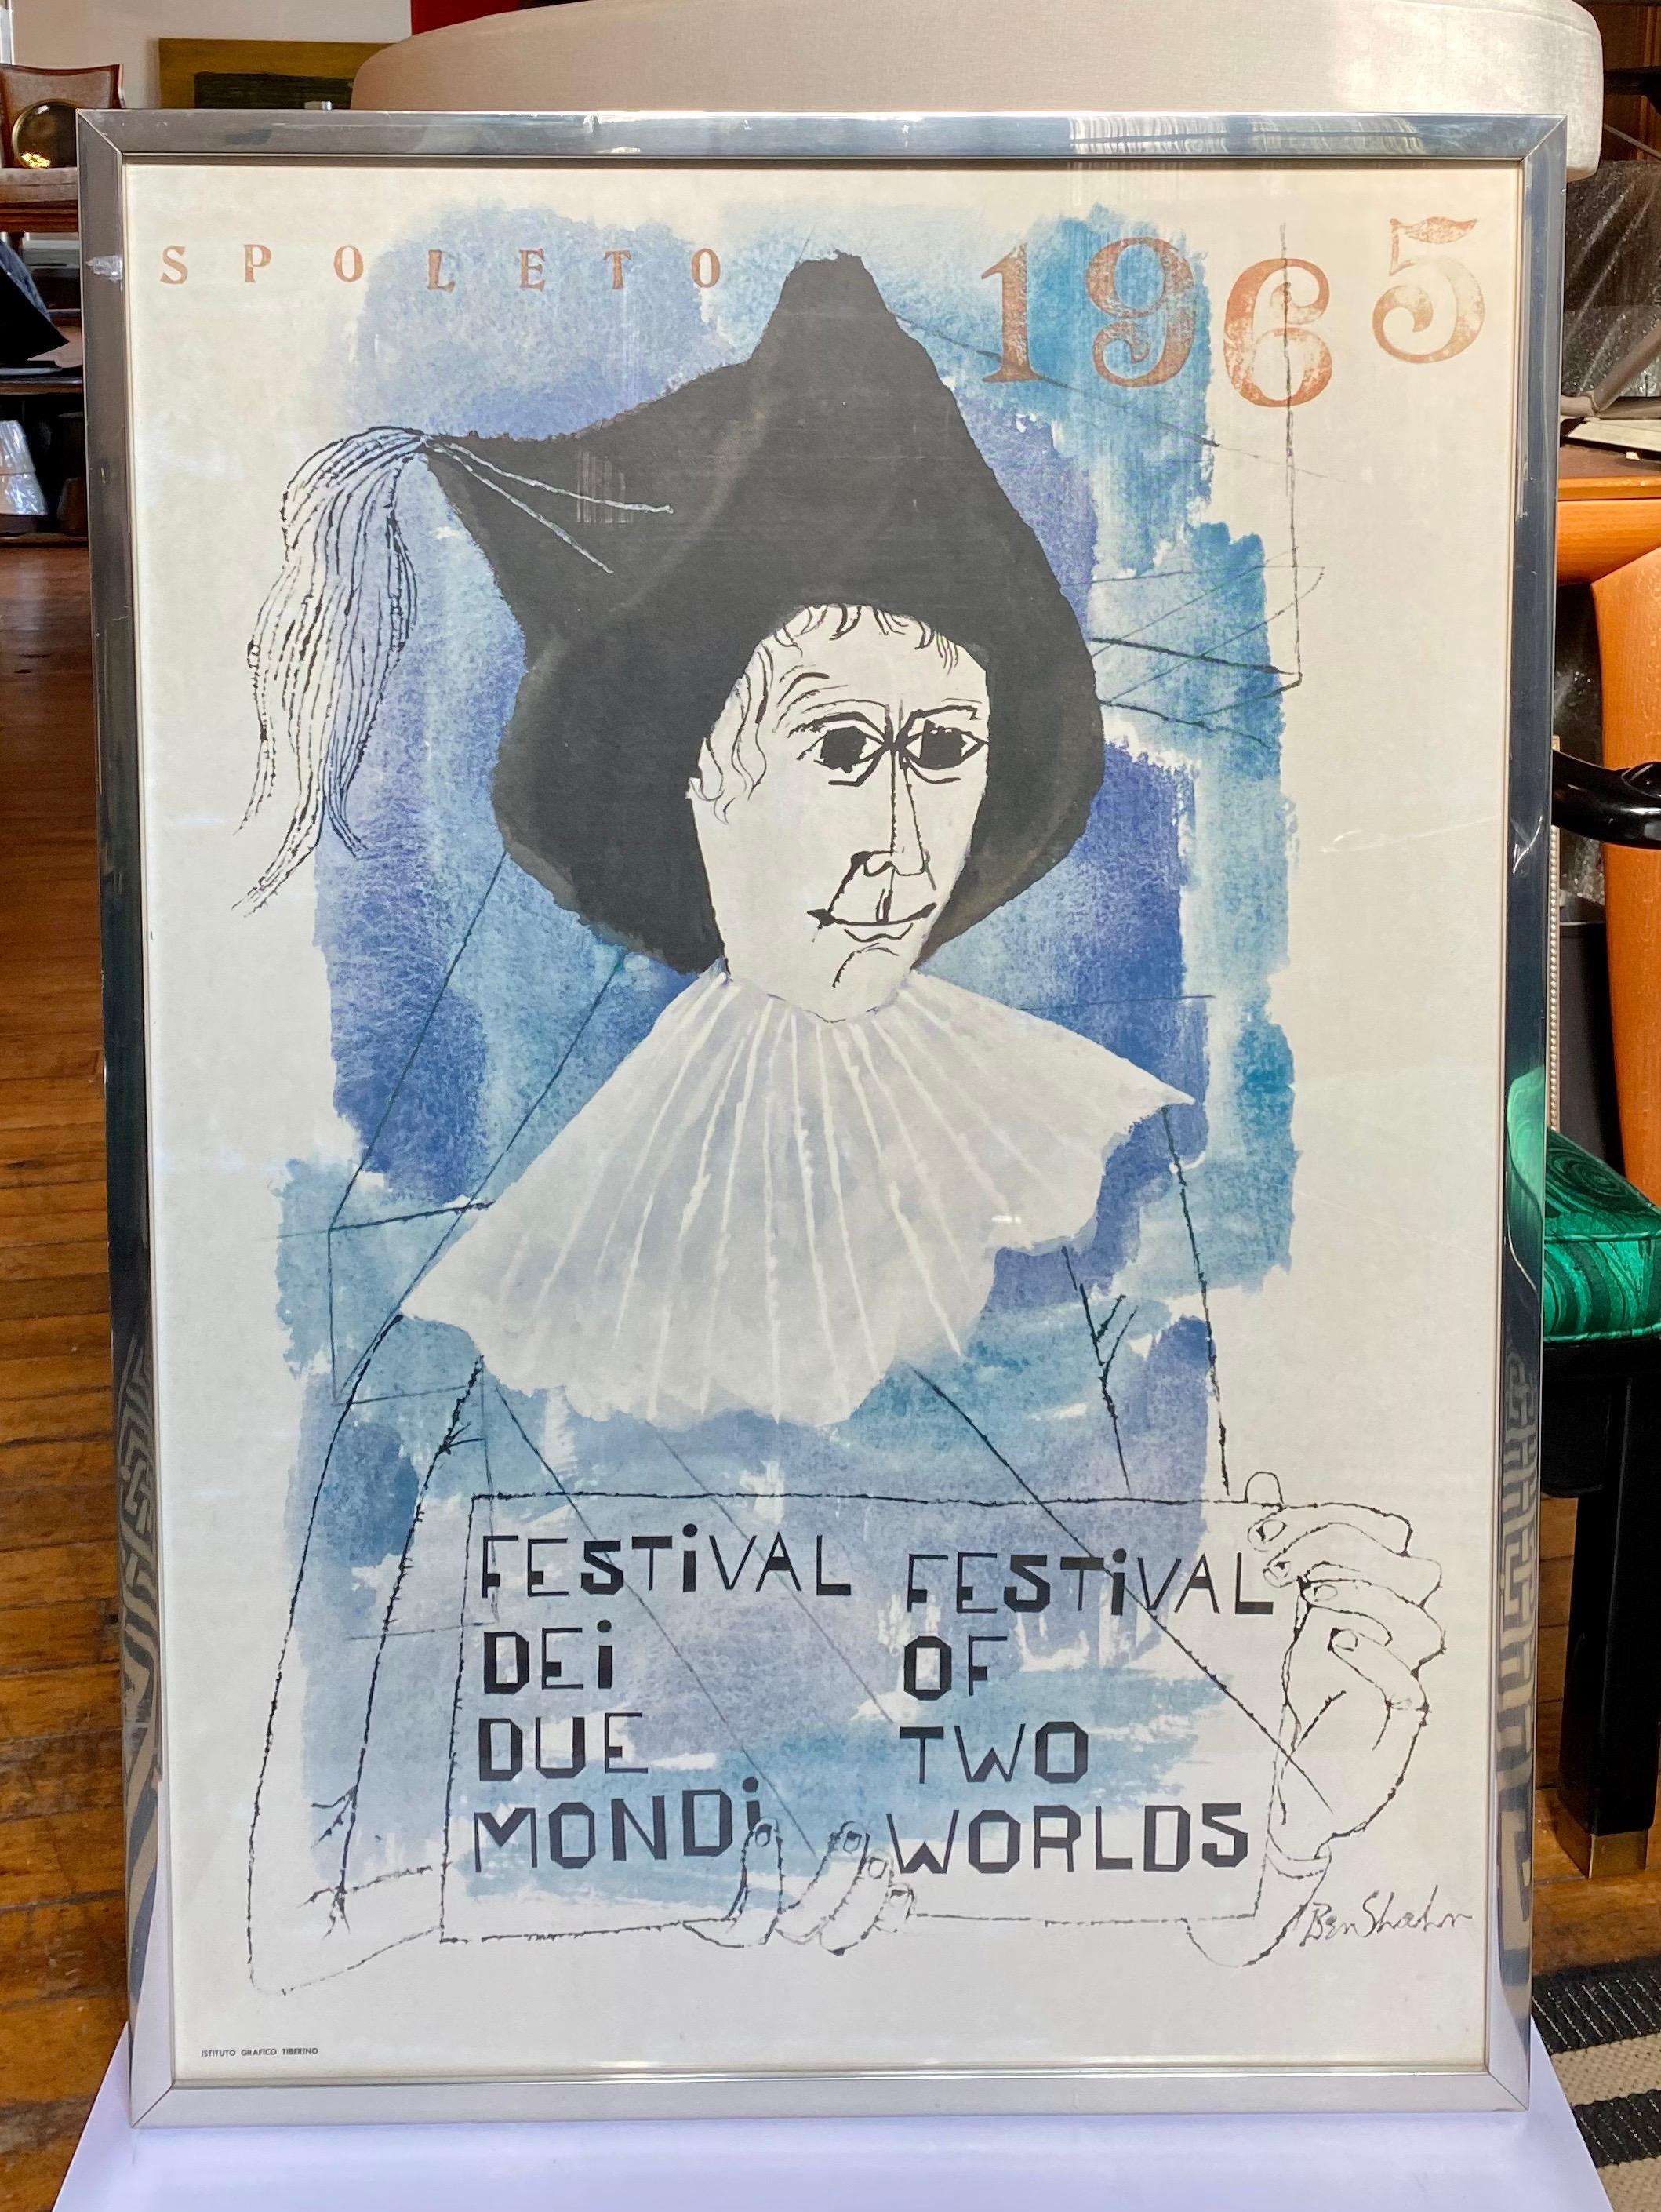 Mid-Century Modern original Ben Shahn Lithograph Exhibition poster from 1965. This figural art piece comes framed with original polished silver tone frame and clear glass front. 

Ben Shahn (American, 1898-1969) Spoleto Festival Dei Due